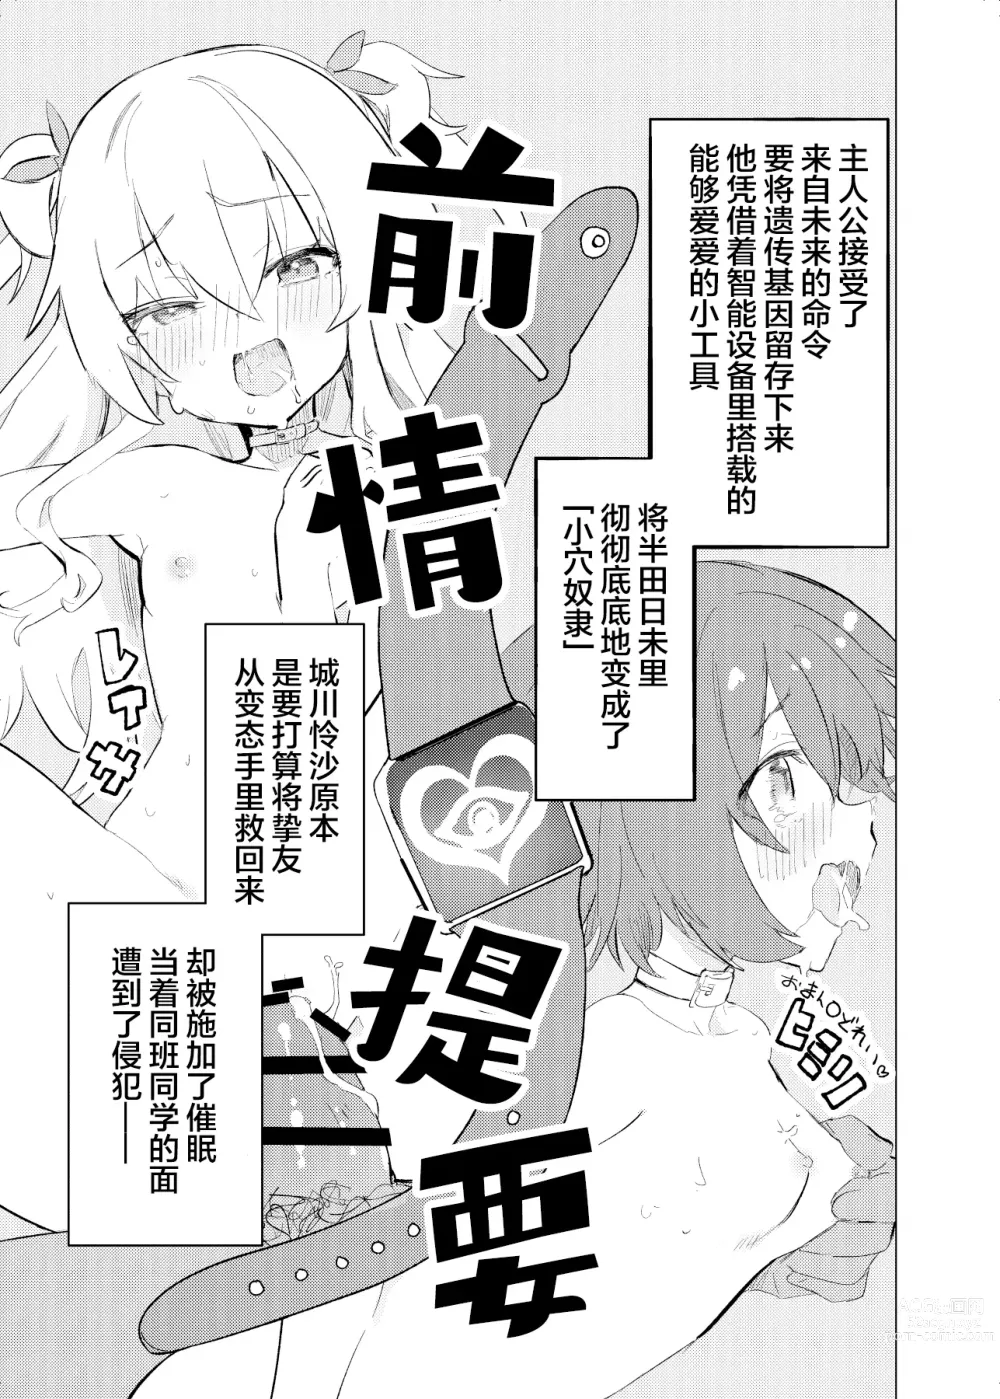 Page 2 of doujinshi S.S.S.DI2